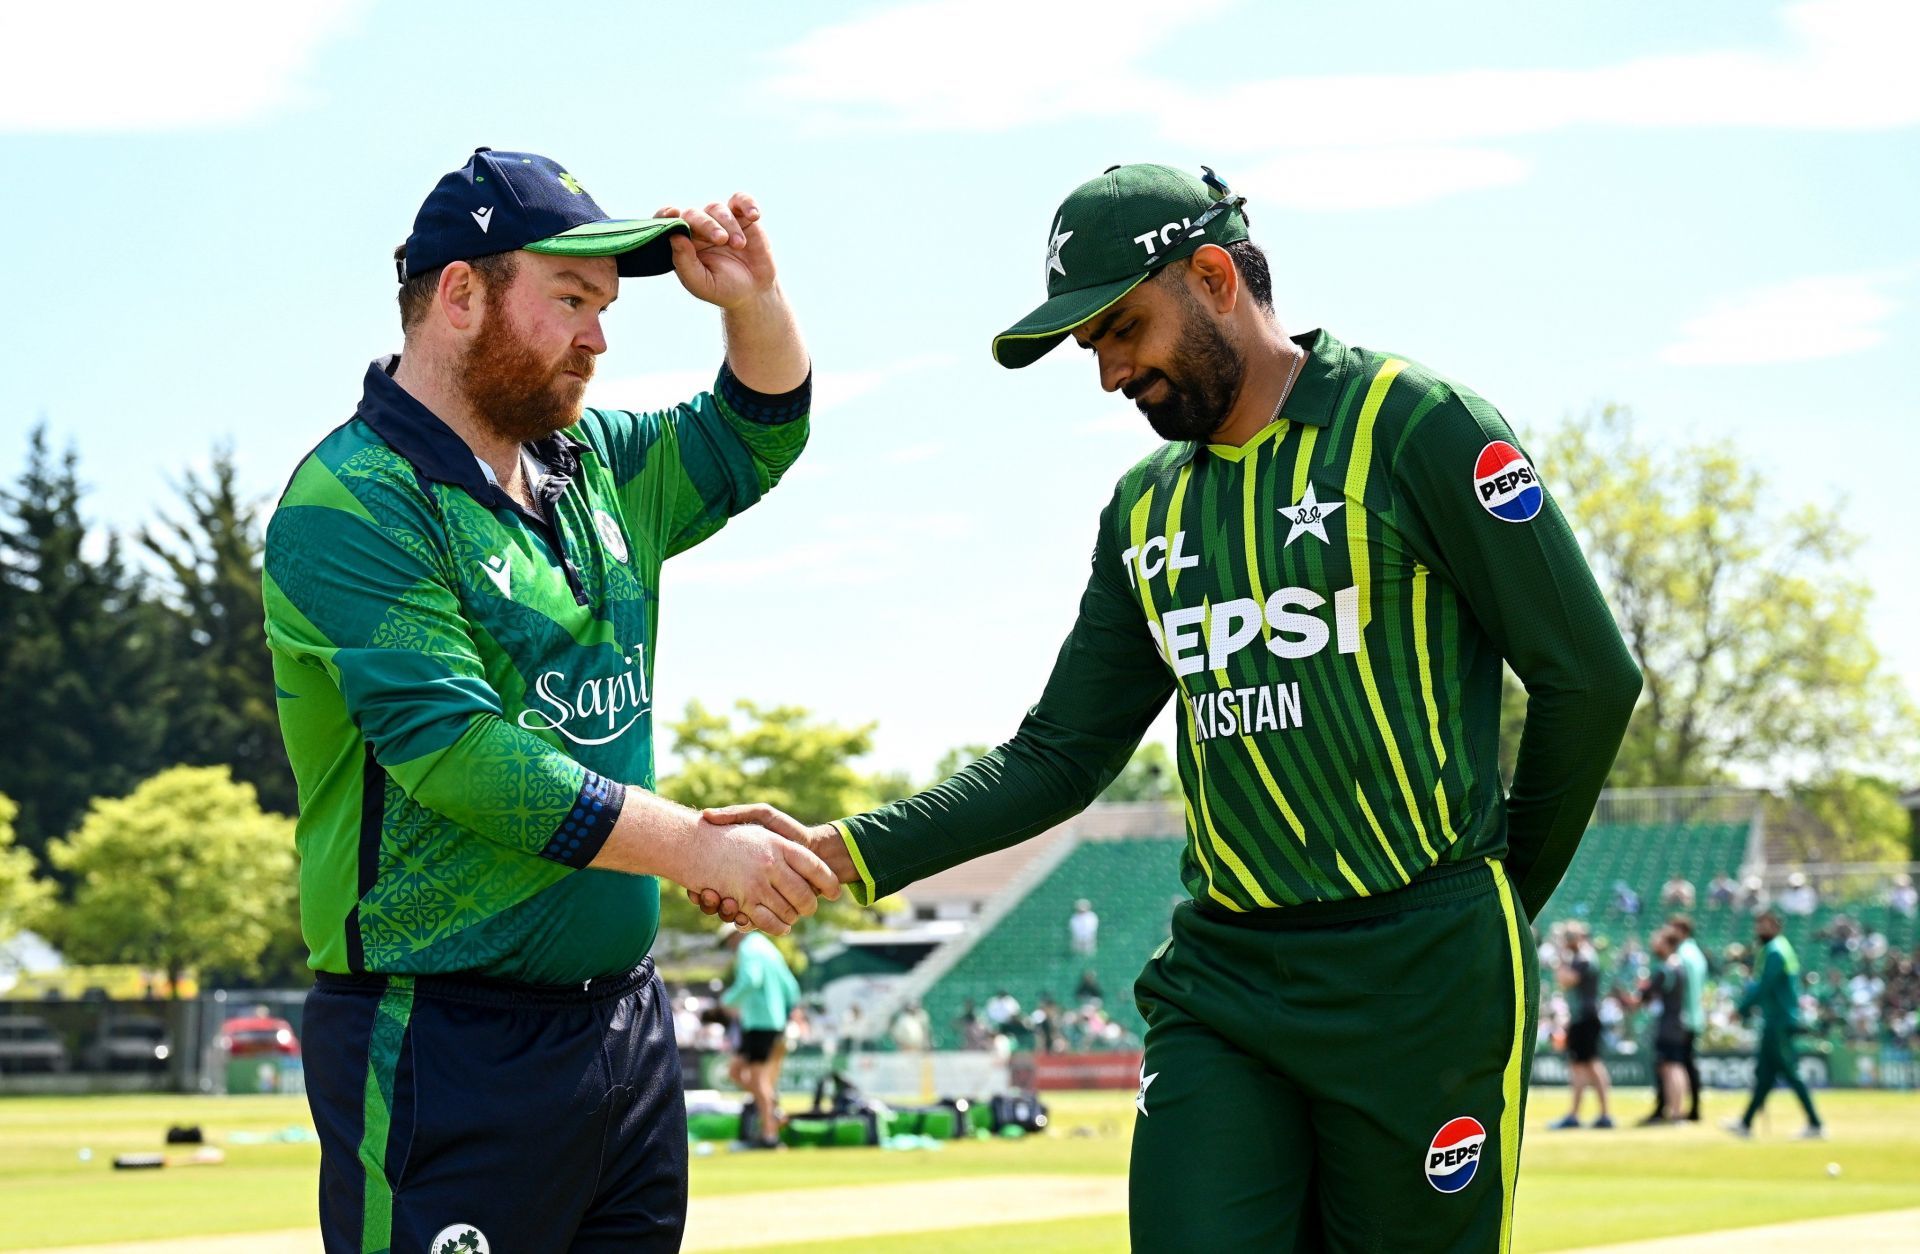 Paul Stirling and Babar Azam. (Credits: Twitter)